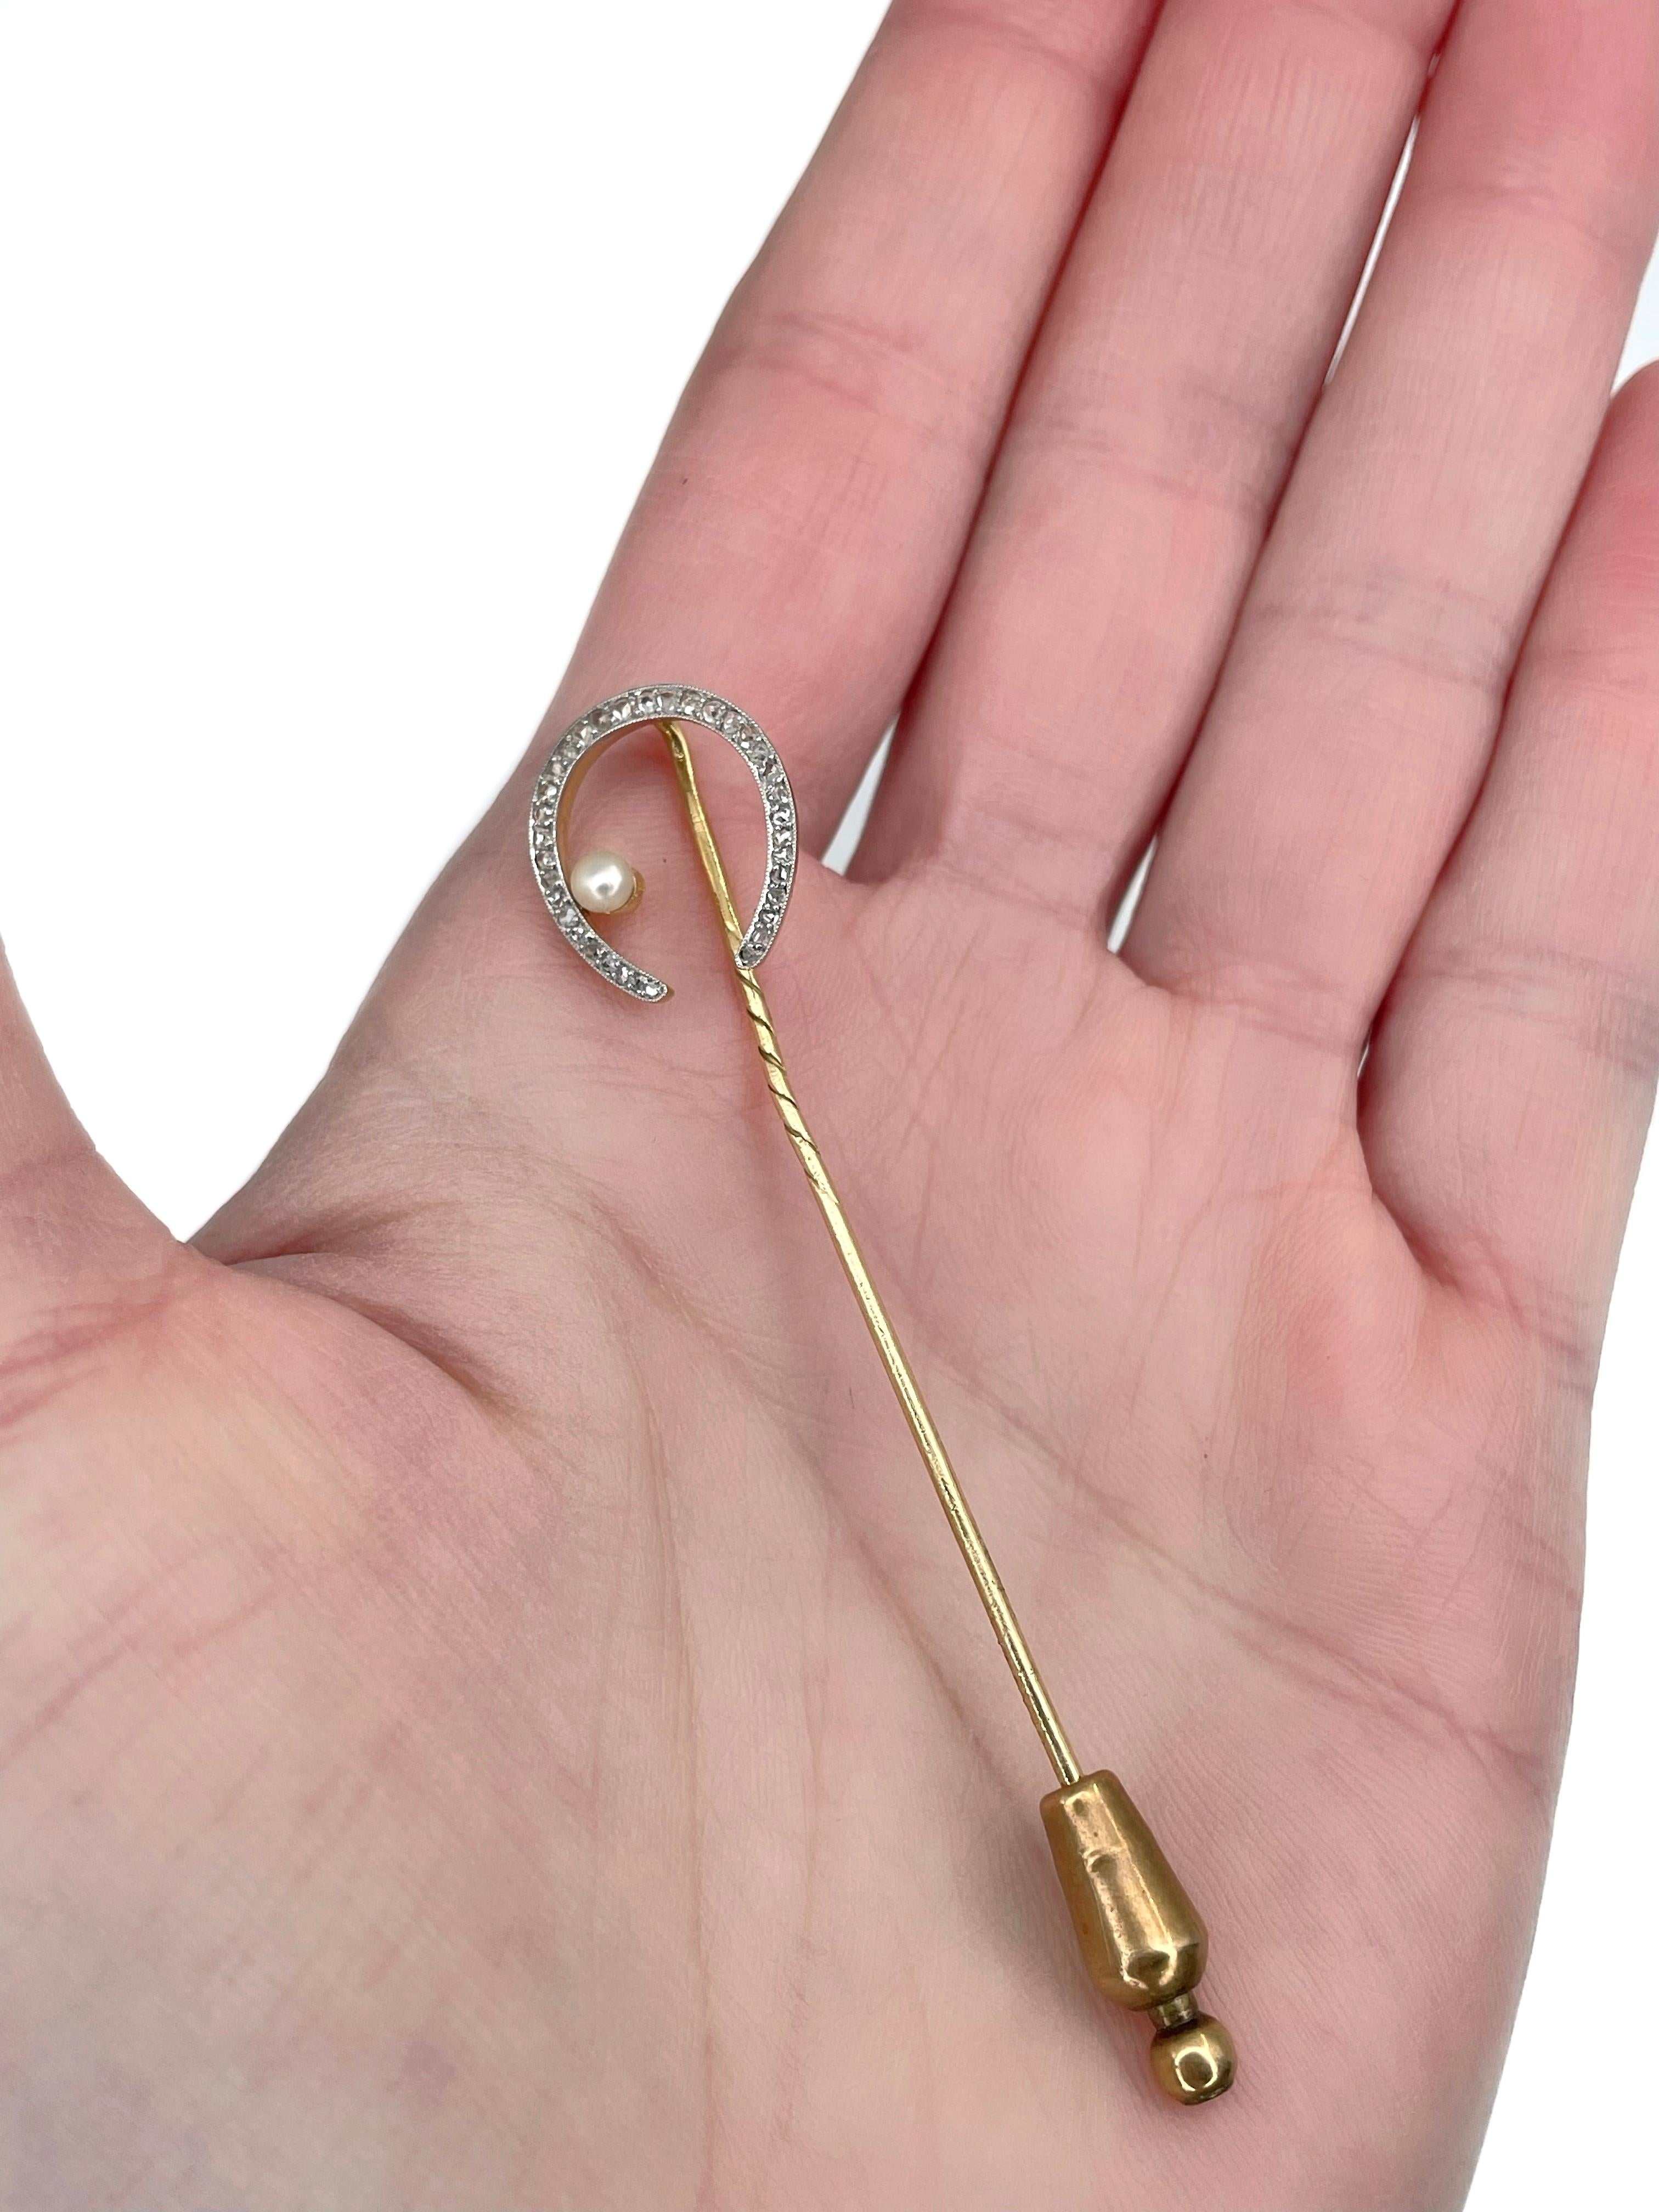 This is a Victorian horse shoe stick pin brooch. It is crafted in 18K yellow gold. Circa 1900. 

The piece features a cultured pearl and rose cut diamonds. 

The clutch is crafted in brass. 

Weight: 3.42g
Length: 7.5cm
Horse shoe: